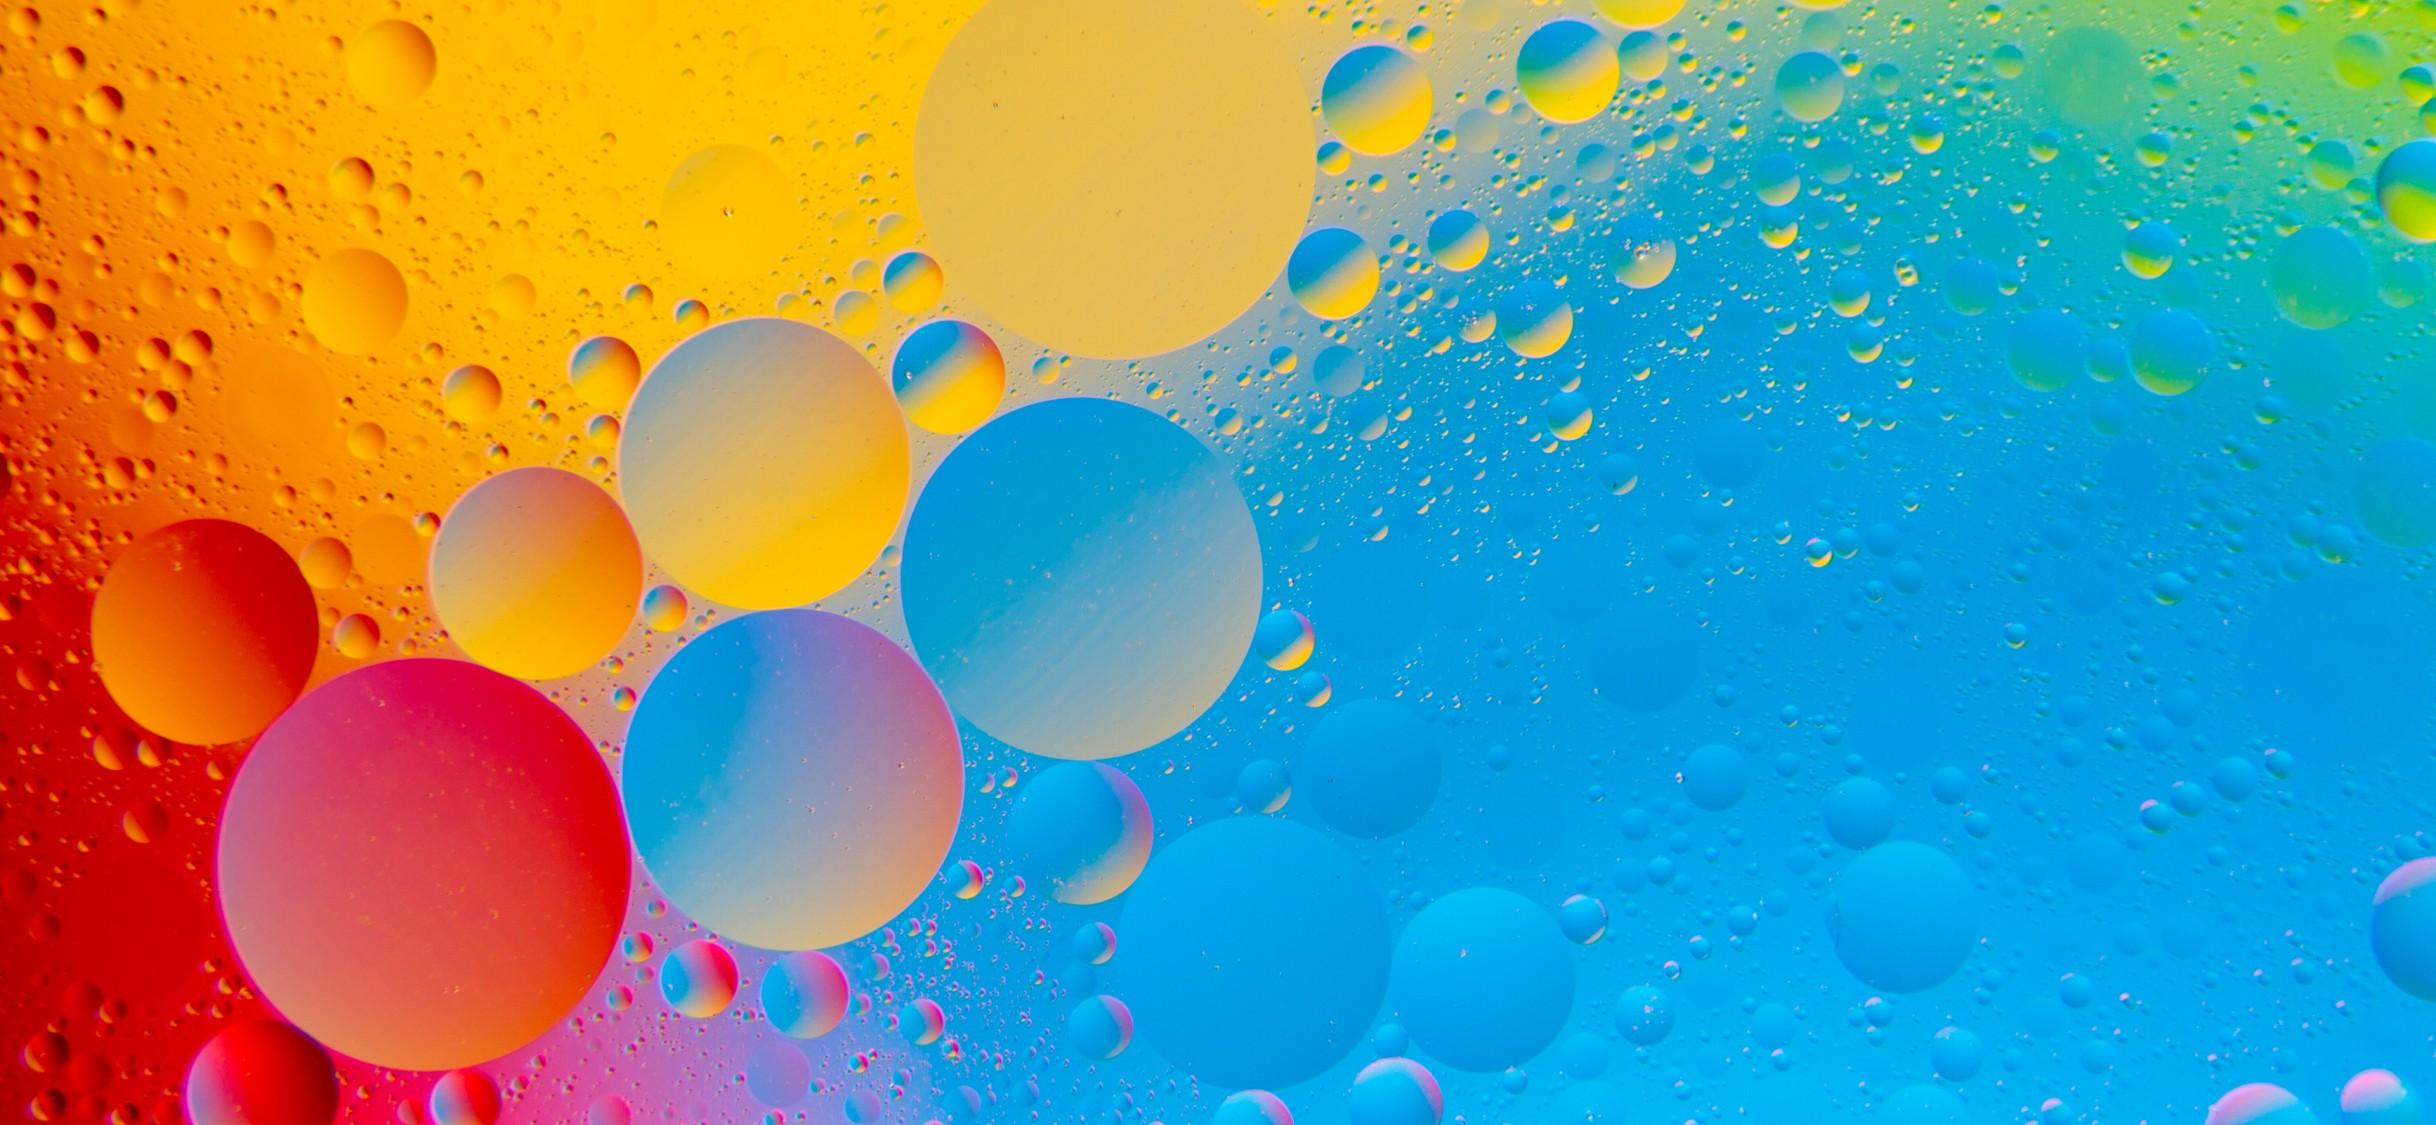 Colourful Bubbles 4K HD Abstract Wallpaper iPhone X Wallpaper